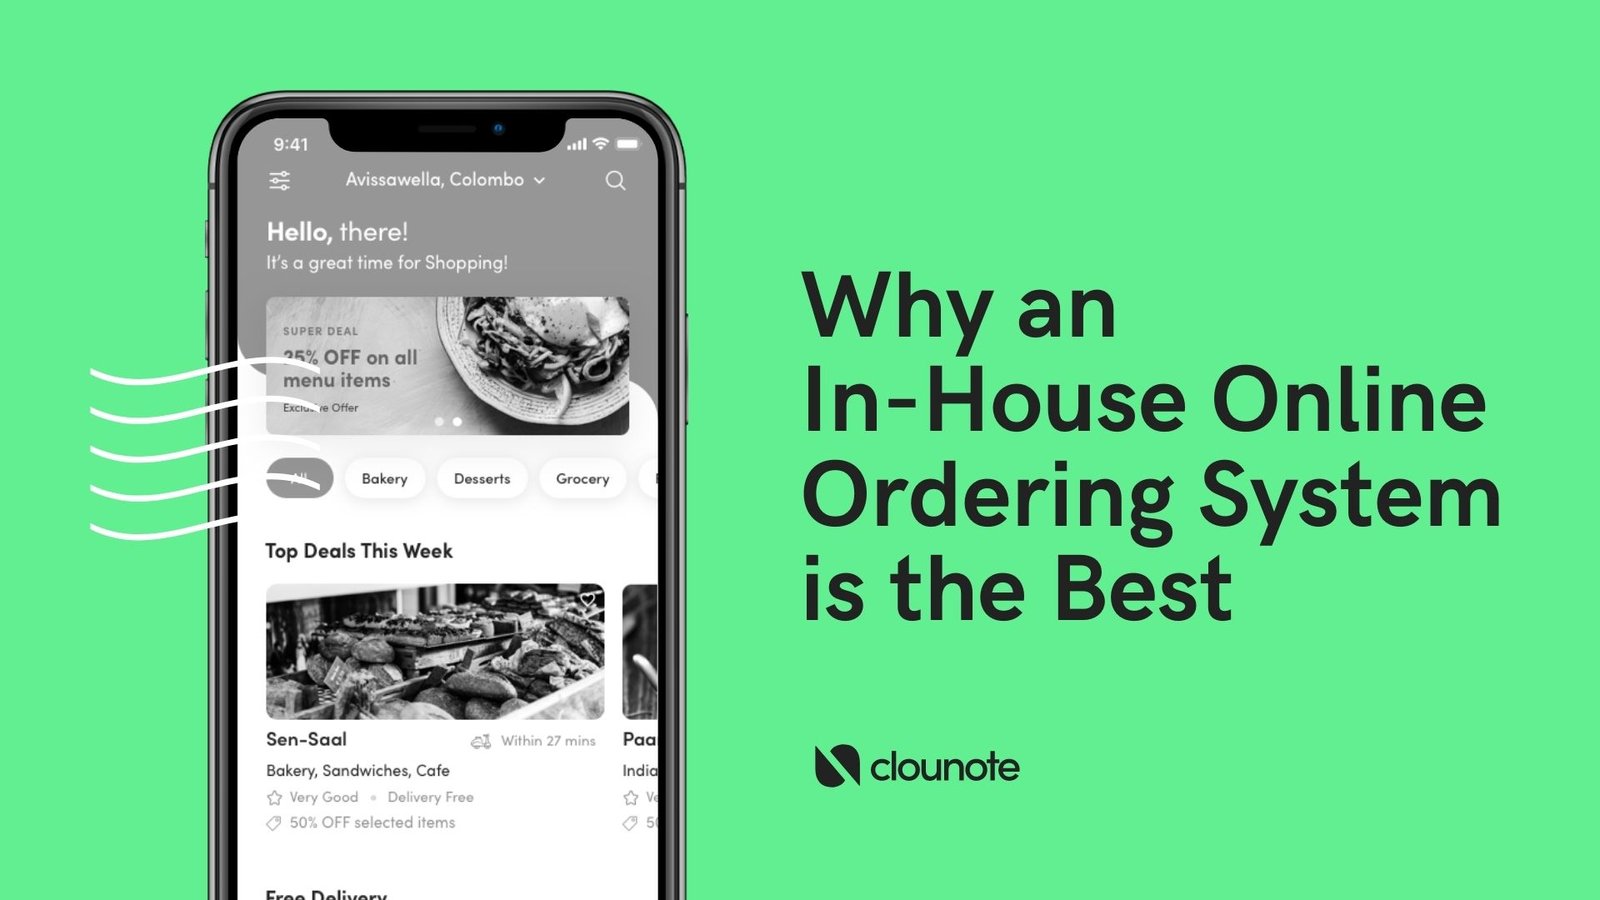 Why an In-House Online Ordering System is the Best